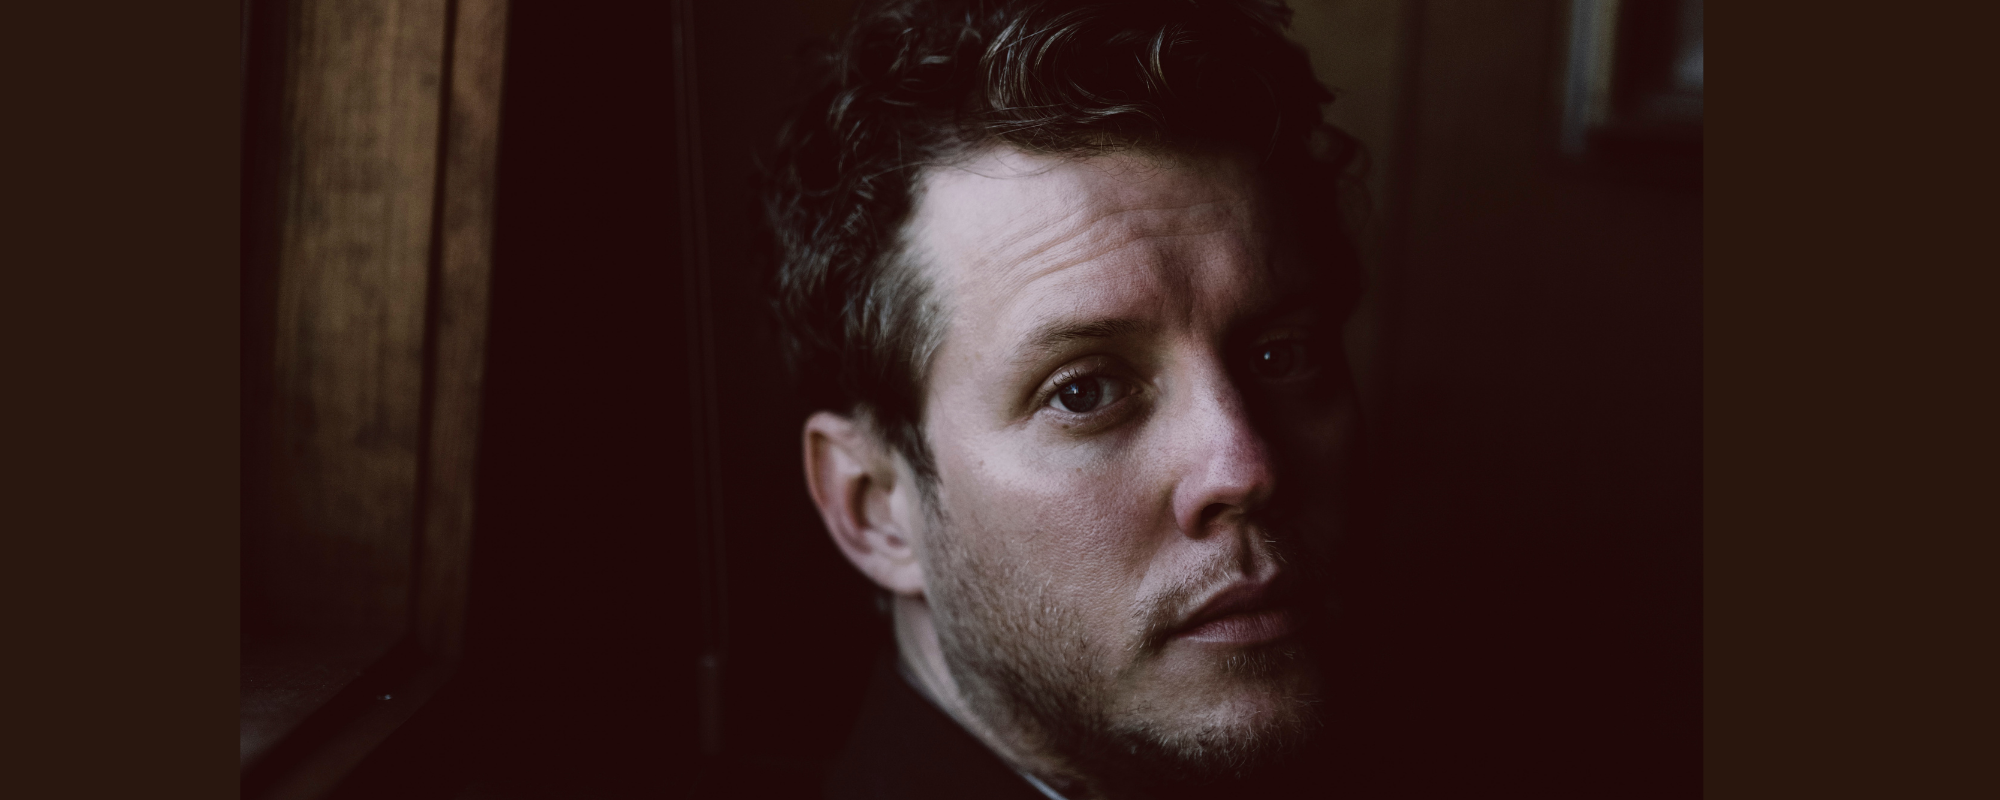 Anderson East’s Existential New Album: ‘Maybe We Never Die’